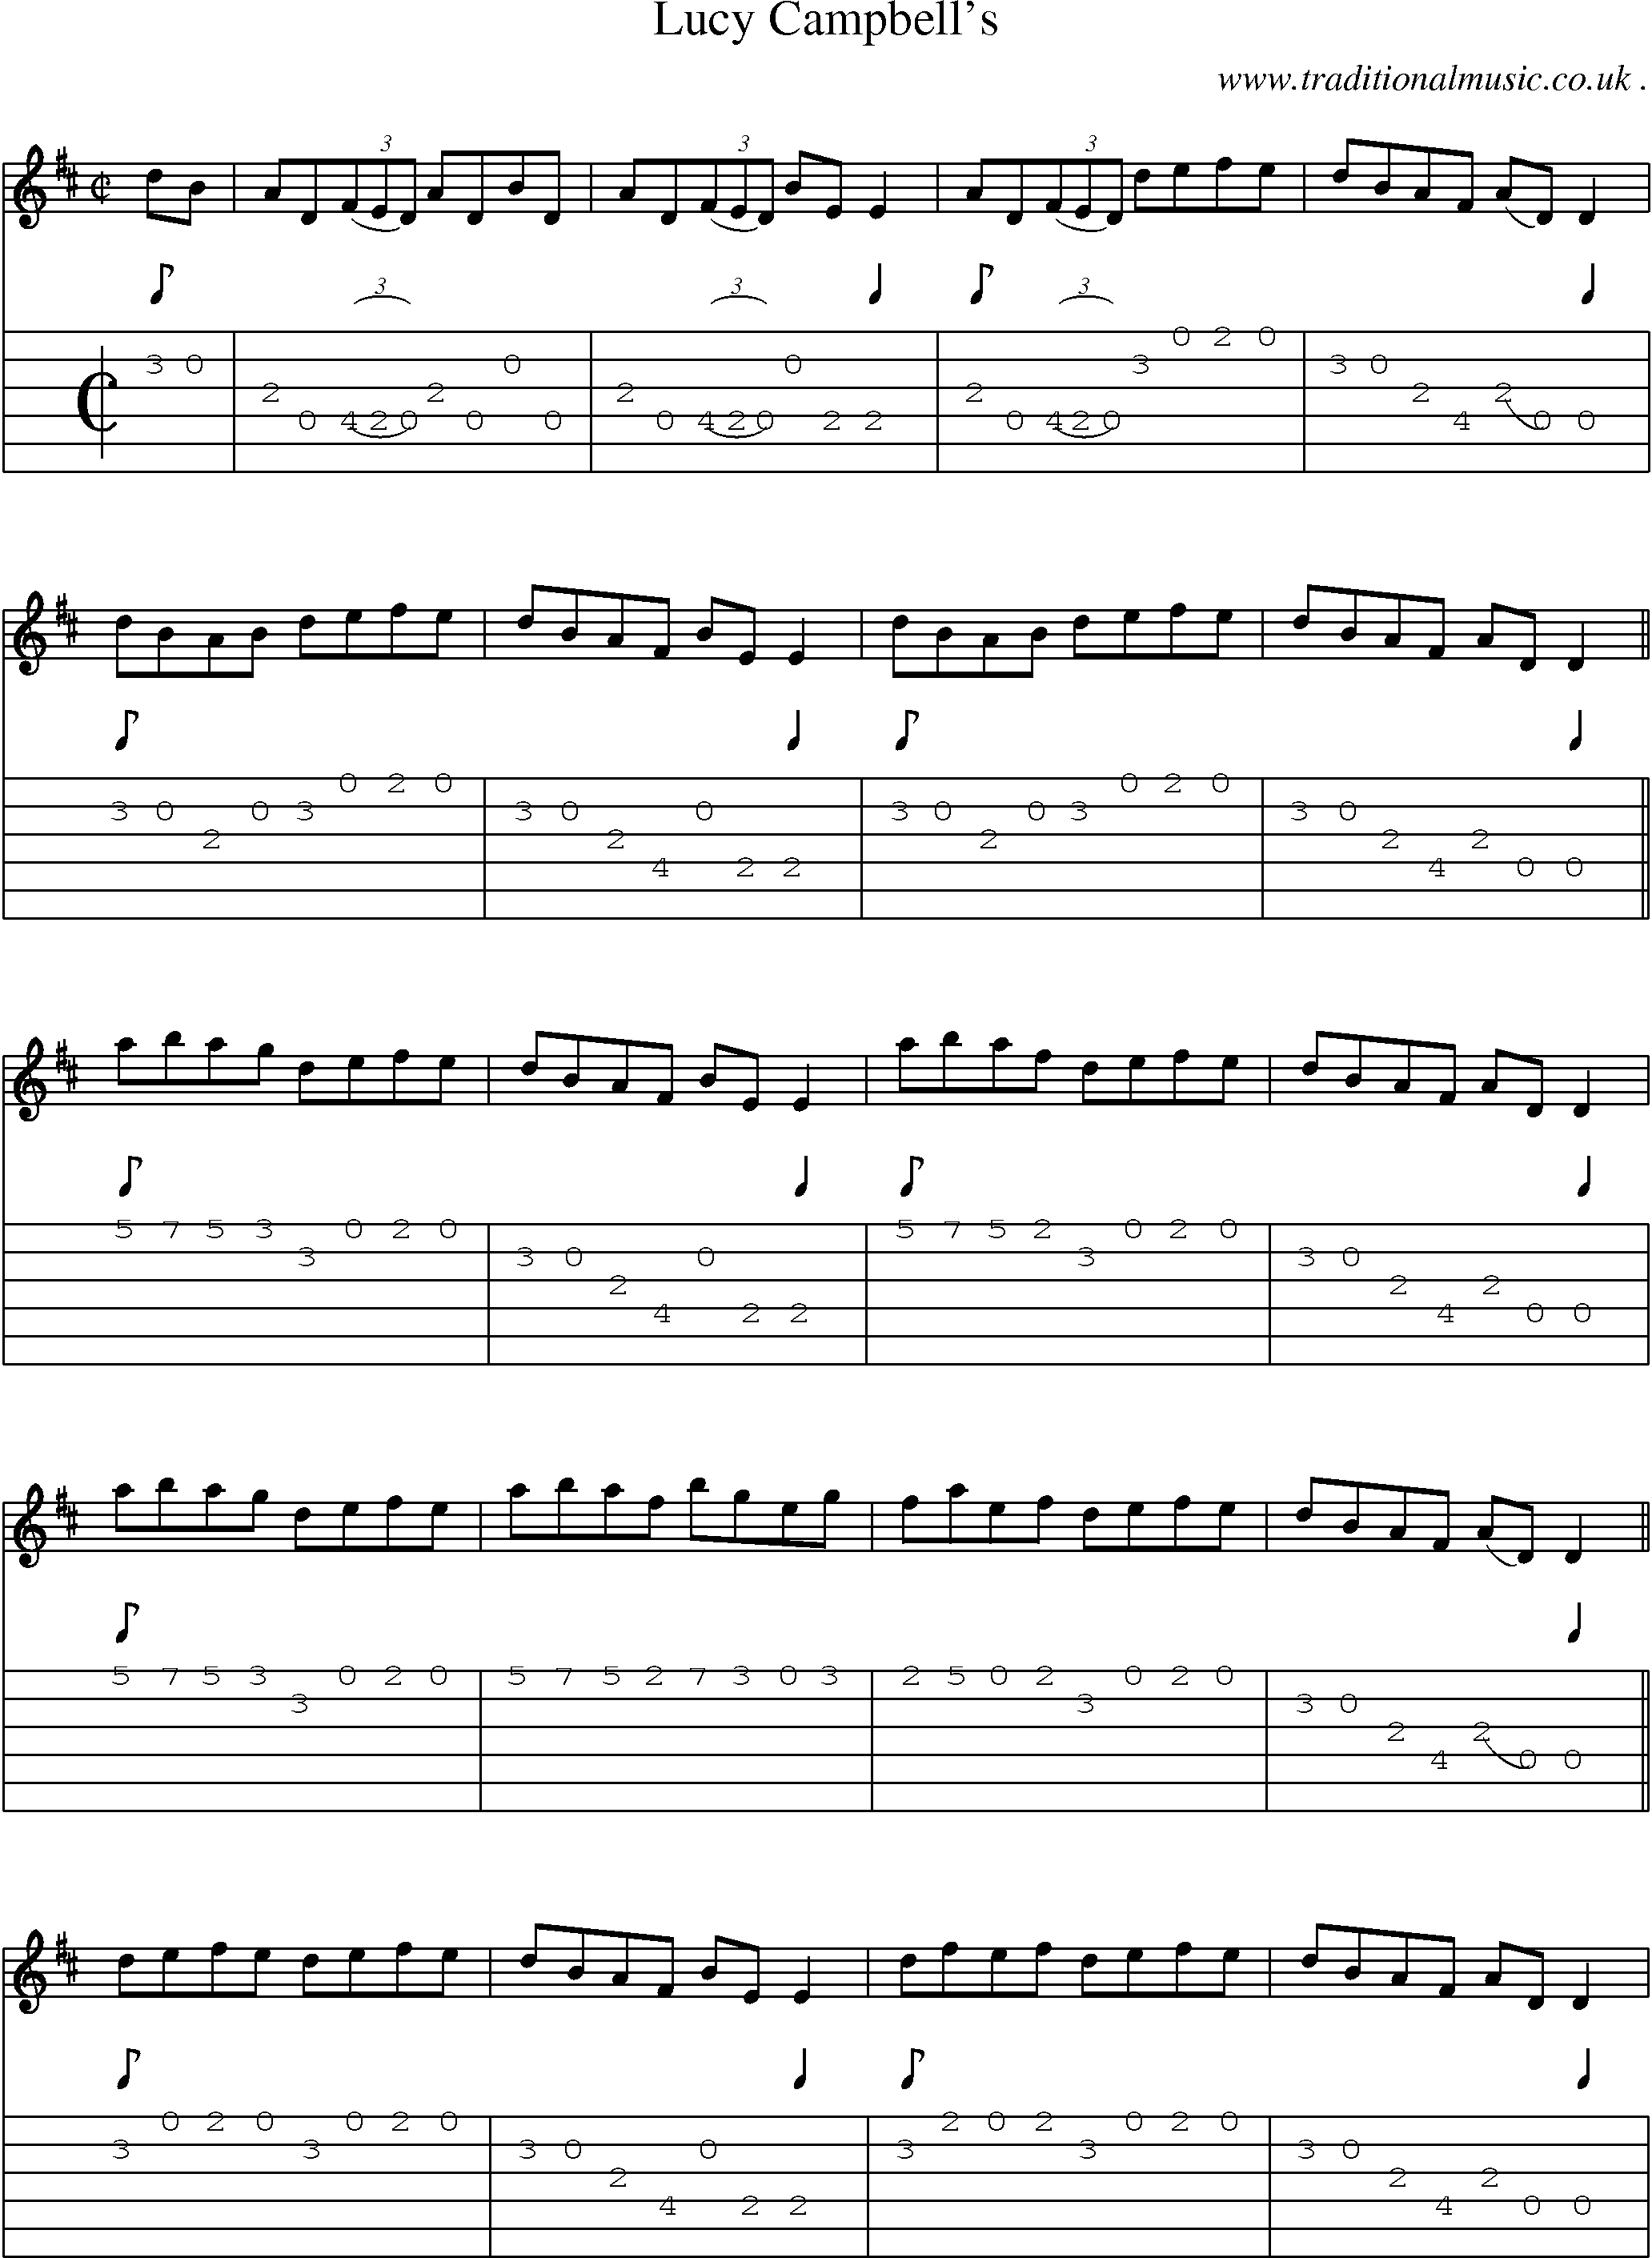 Sheet-Music and Guitar Tabs for Lucy Campbells